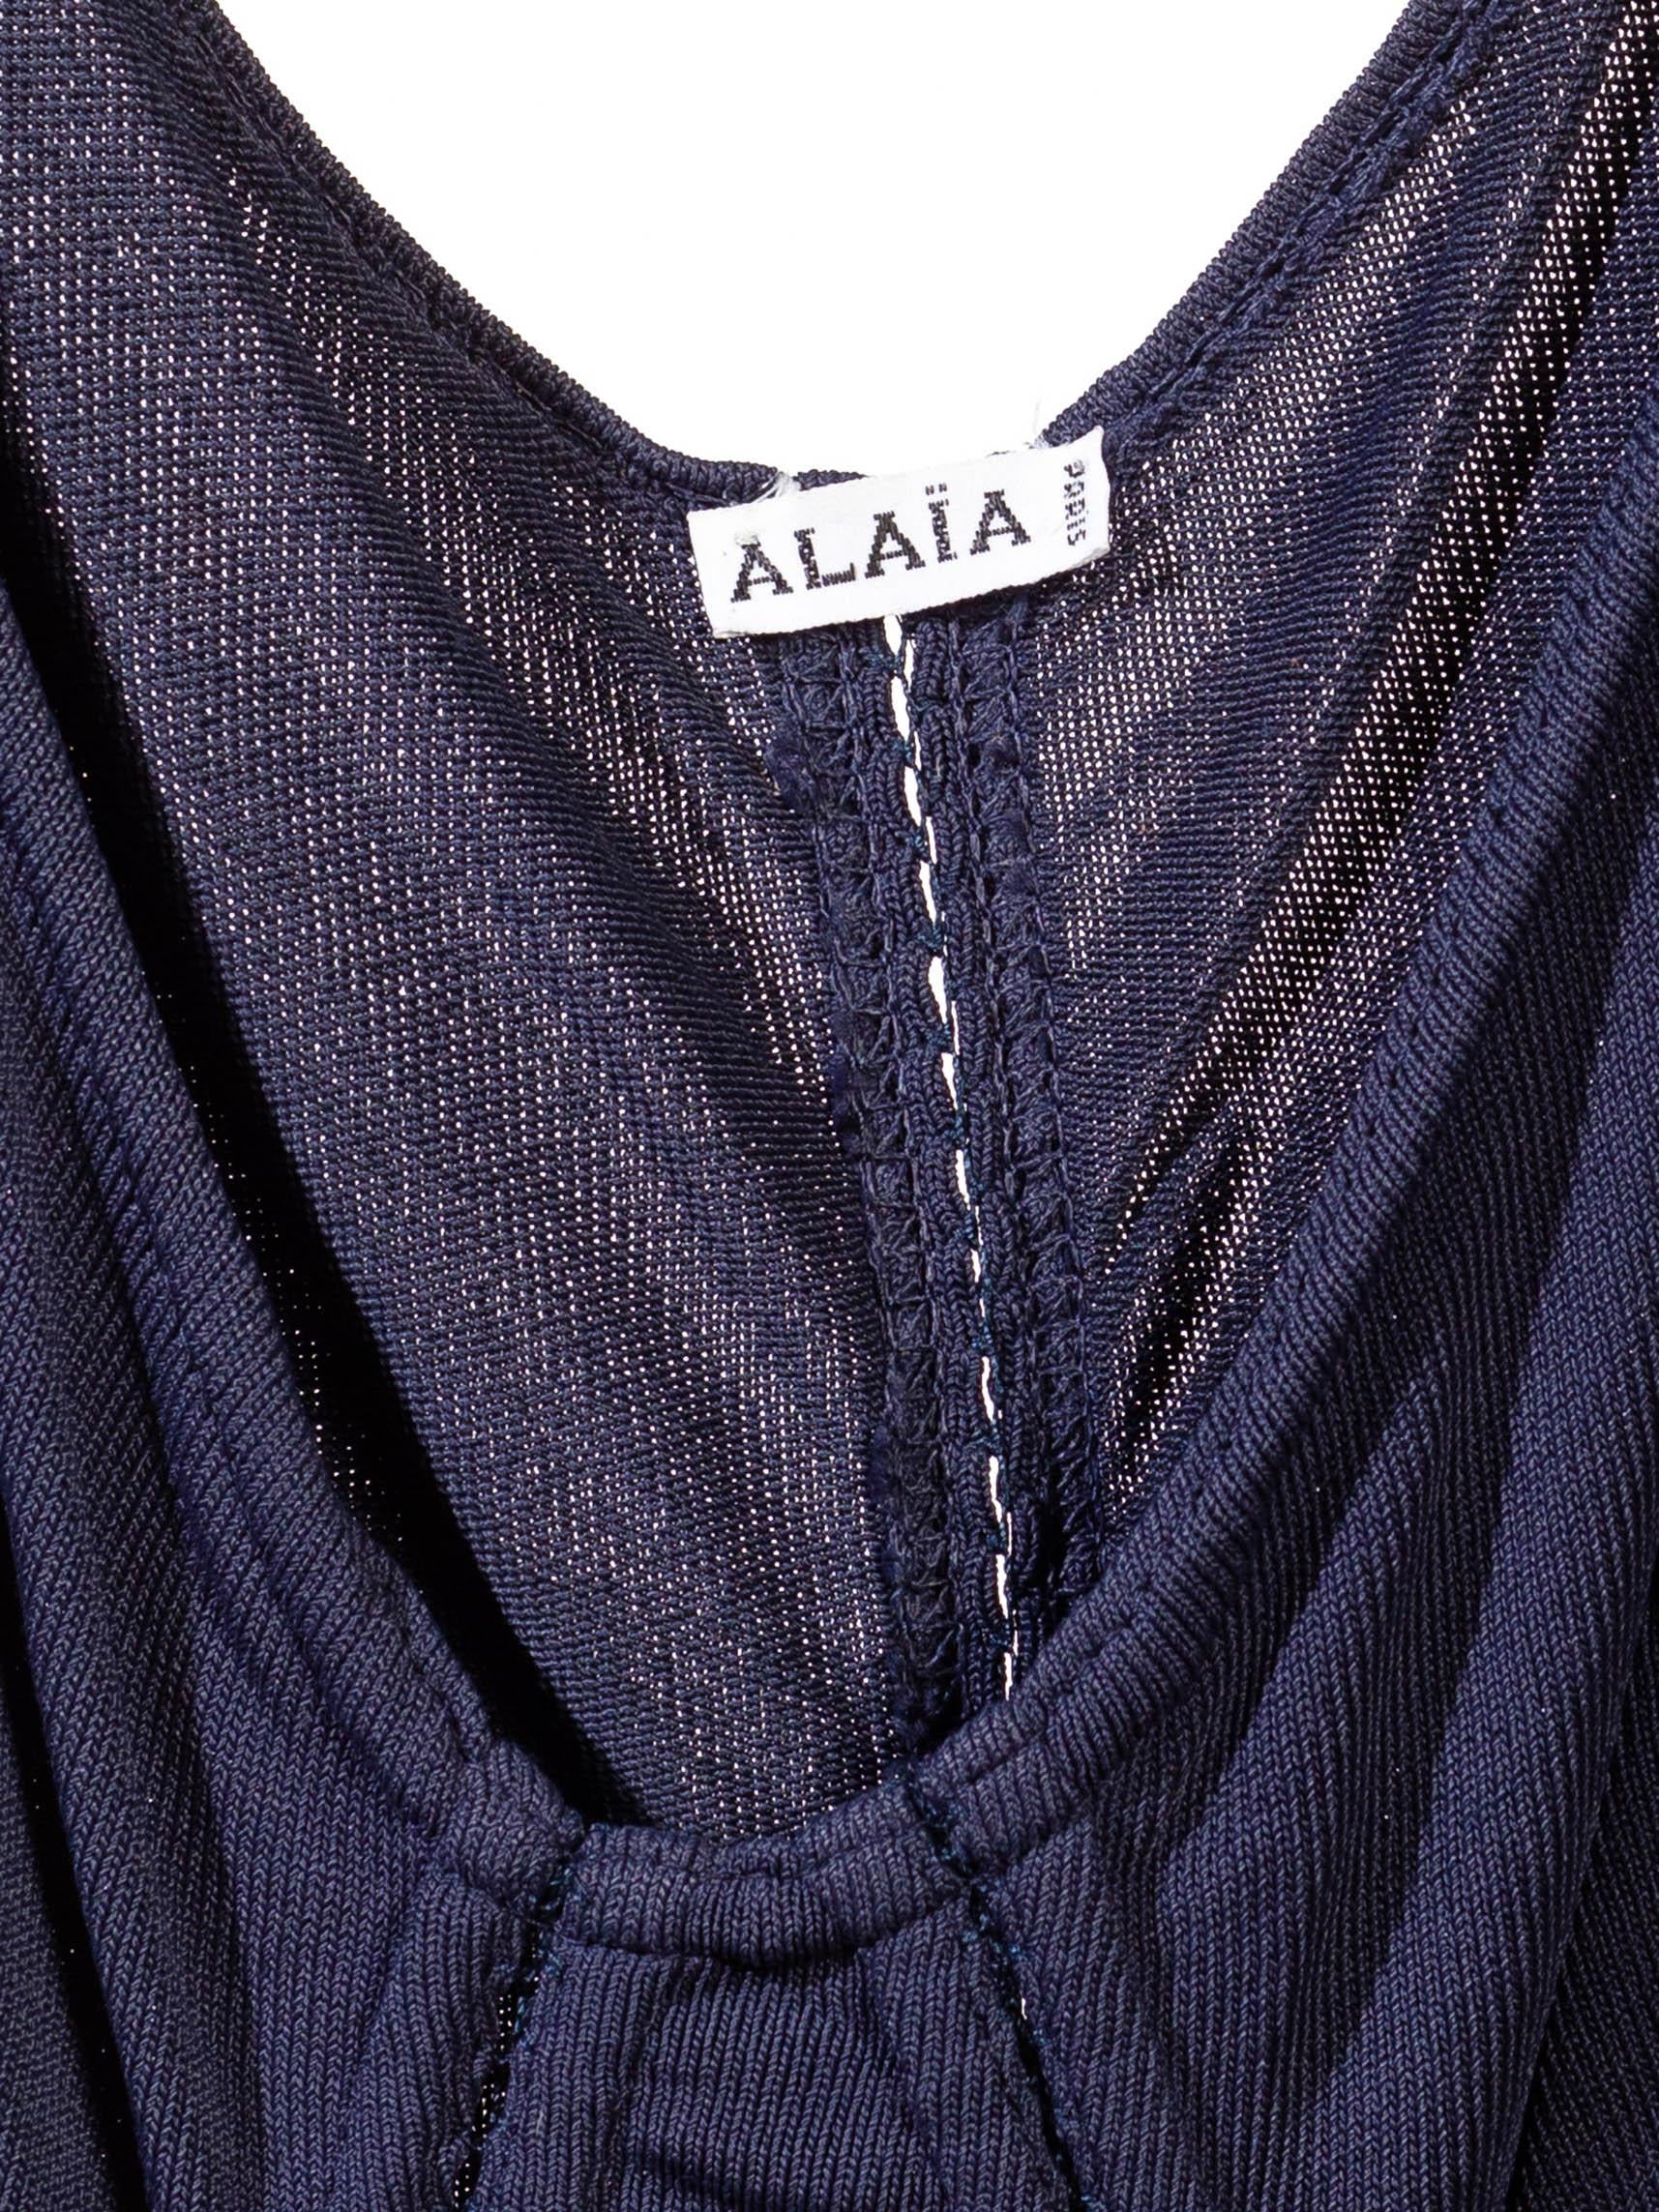 1980S ALAIA Navy Rayon Knit Top For Sale 3